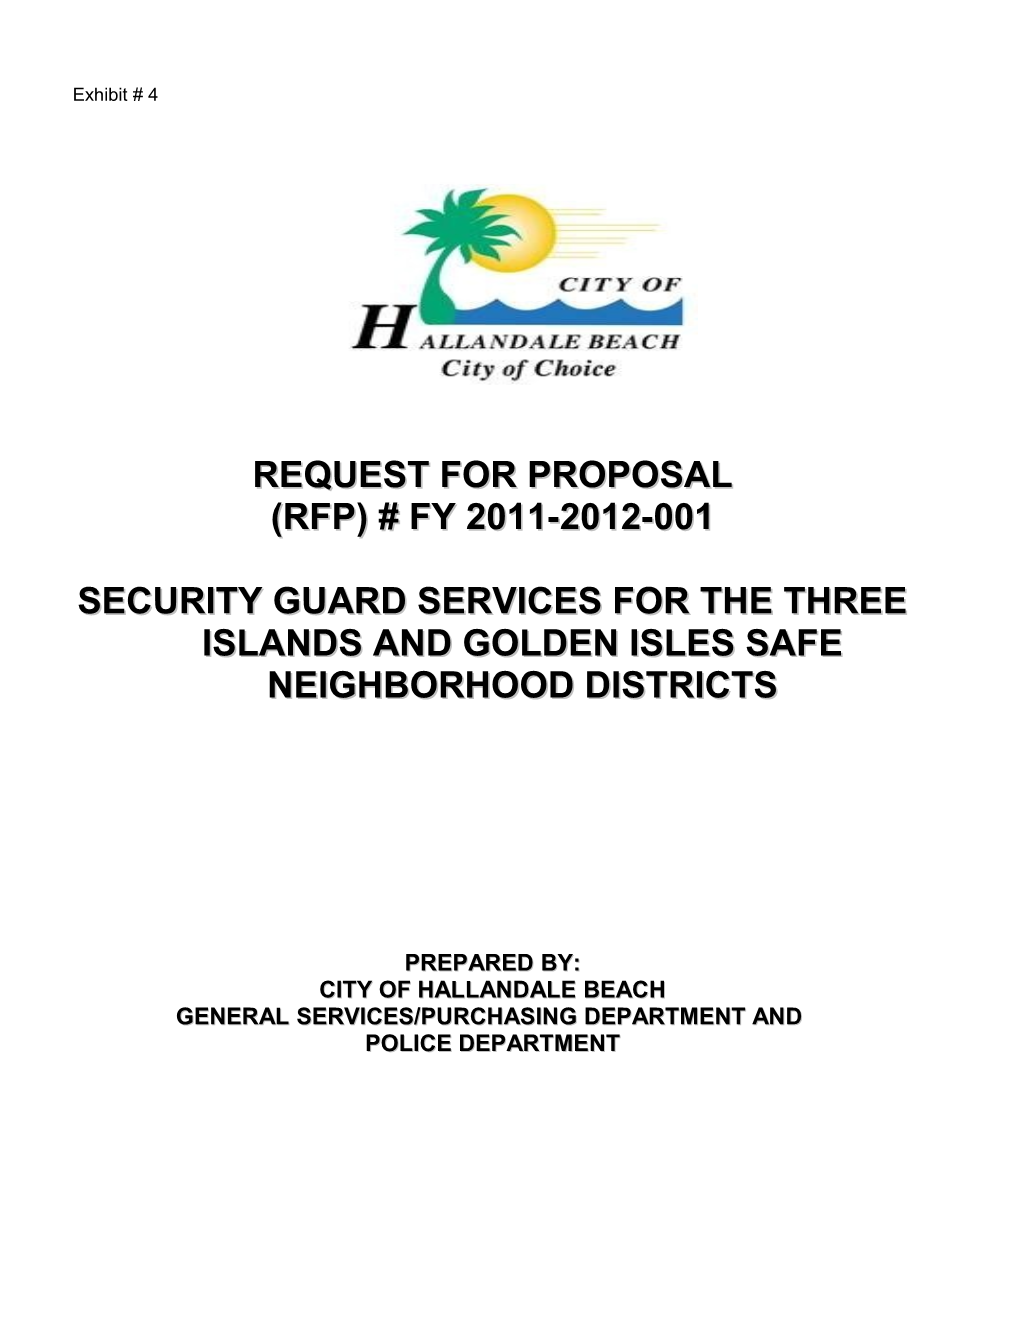 LEGAL NOTICE Is Hereby Given That the CITY of HALLANDALE BEACH on BEHALF of the THREE ISLANDS